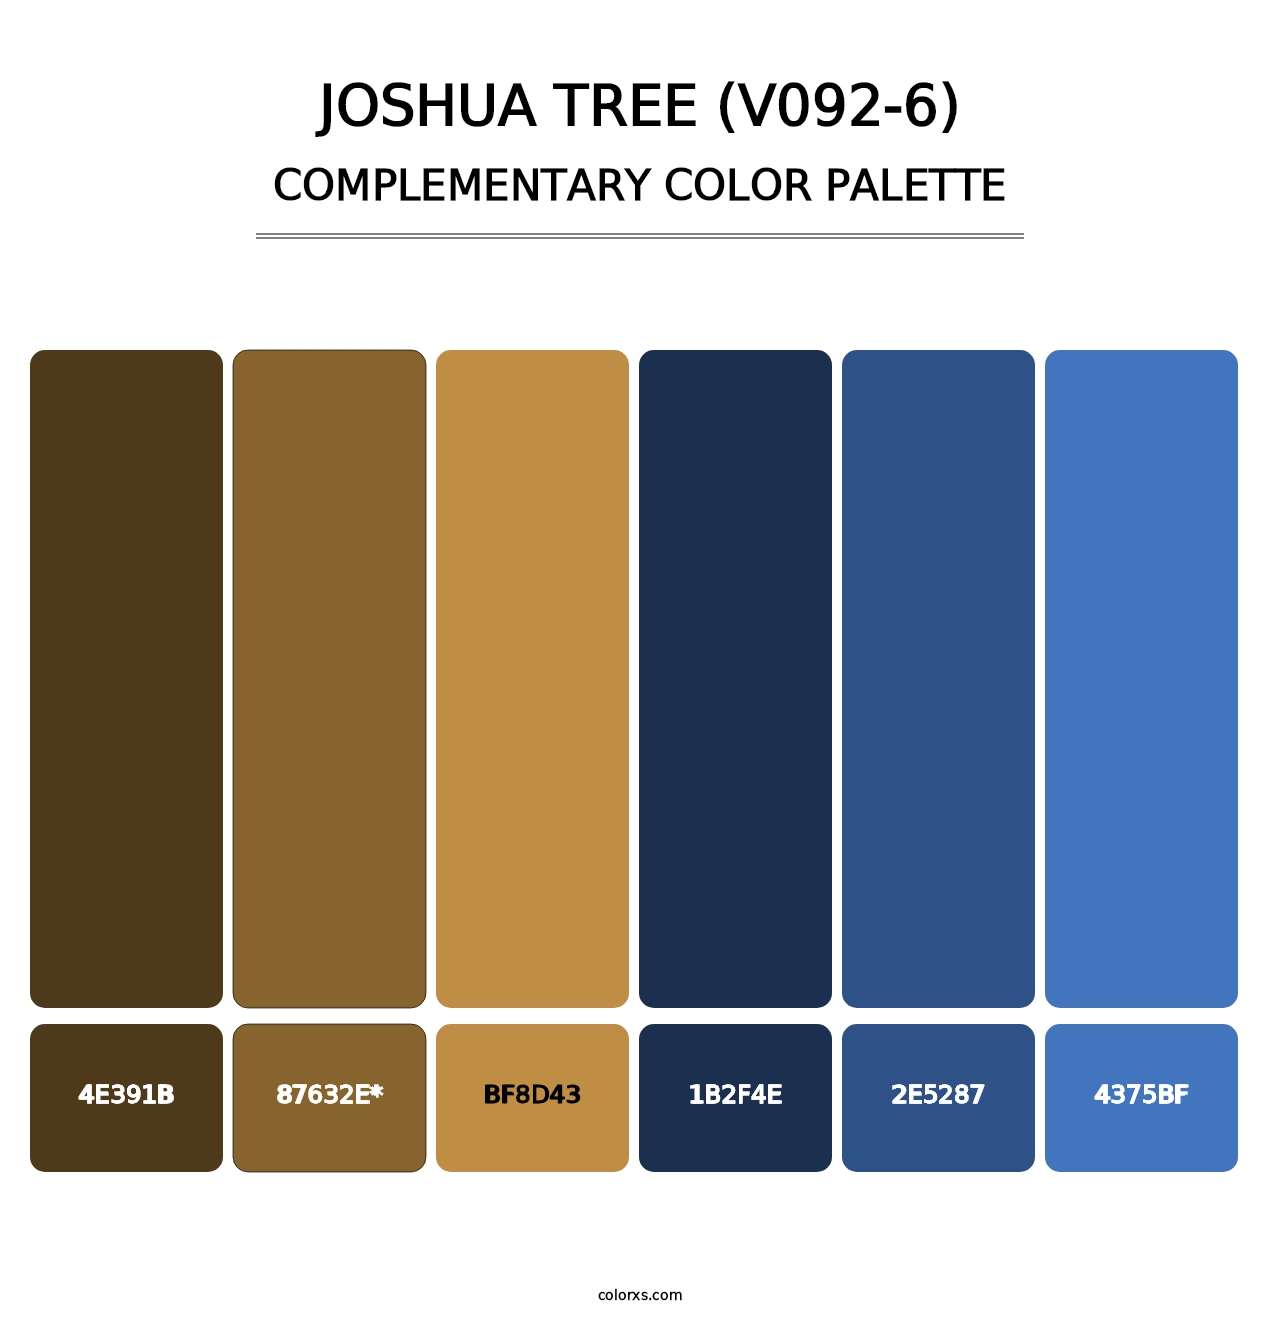 Joshua Tree (V092-6) - Complementary Color Palette